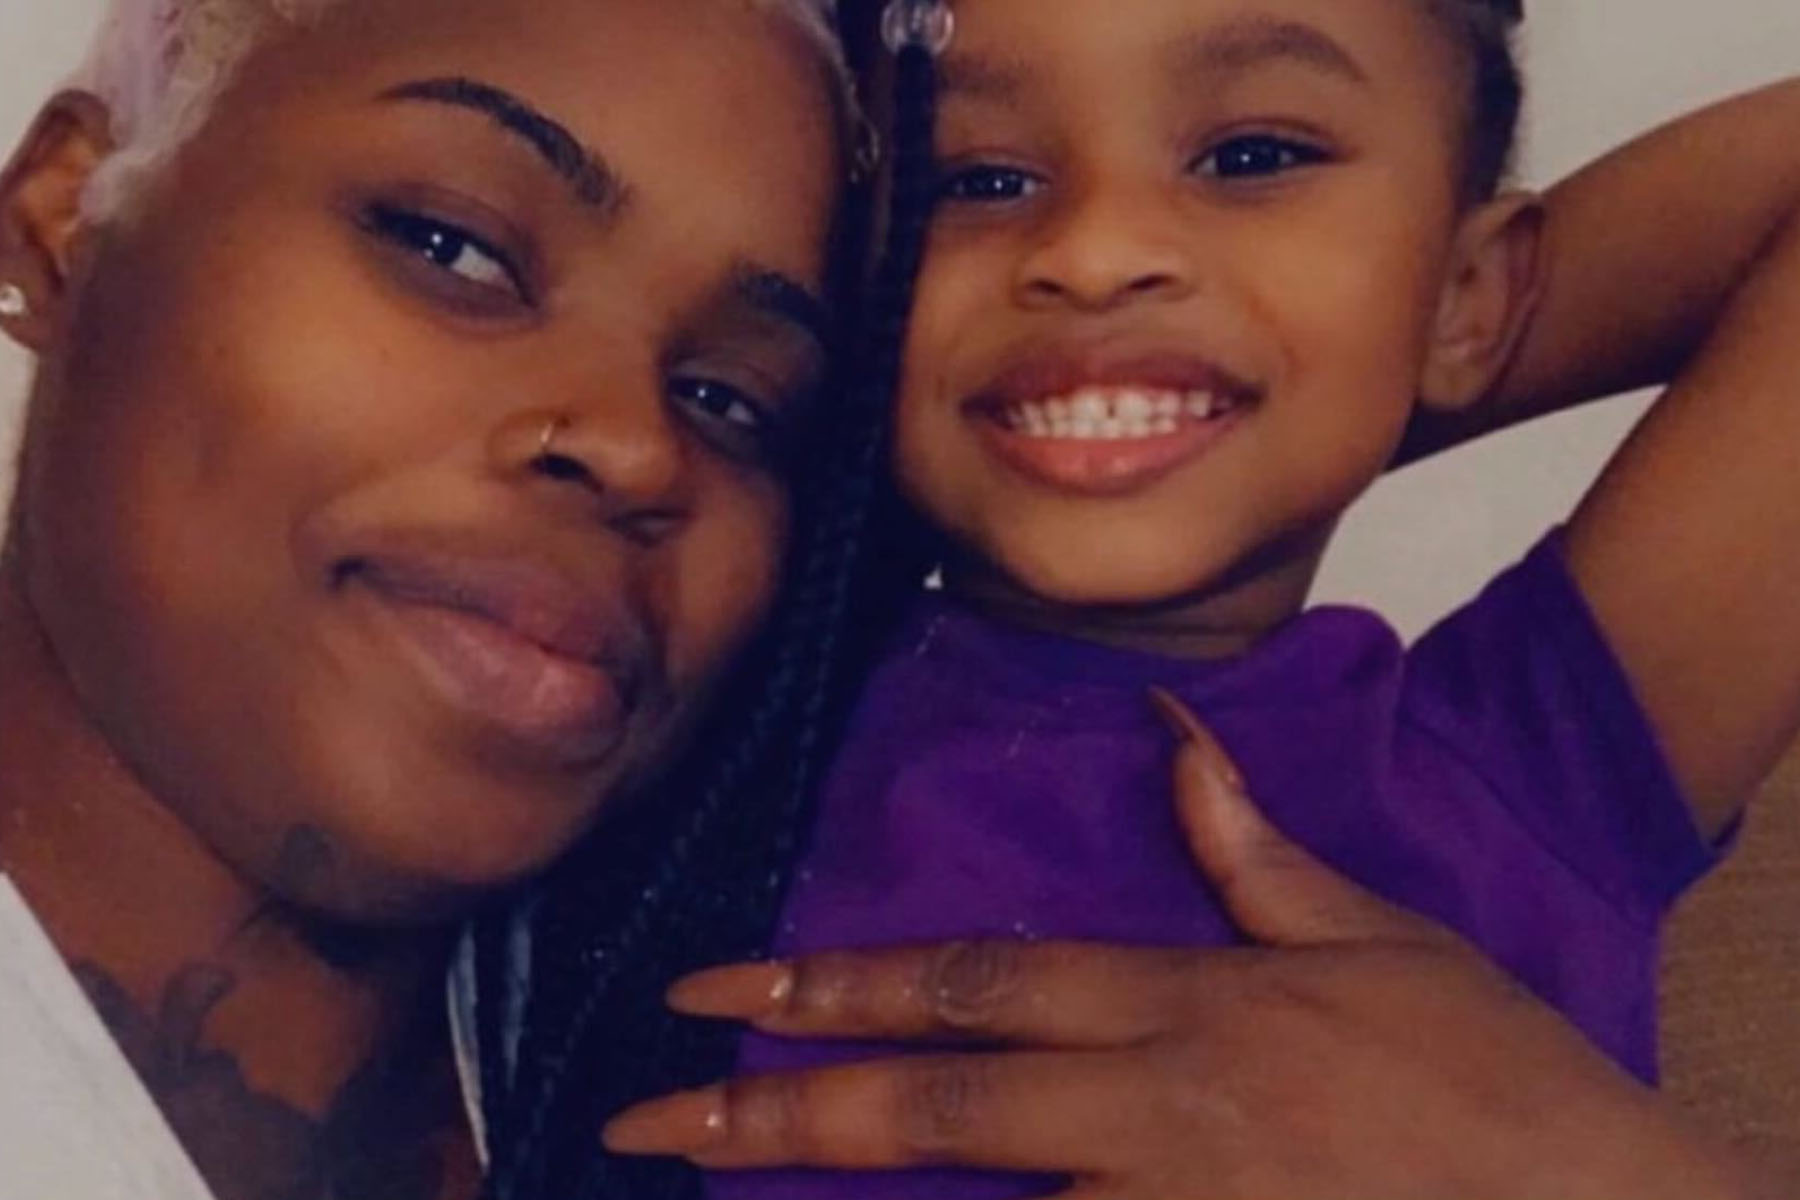 Asia Davis takes a selfie with her daughter Myles.